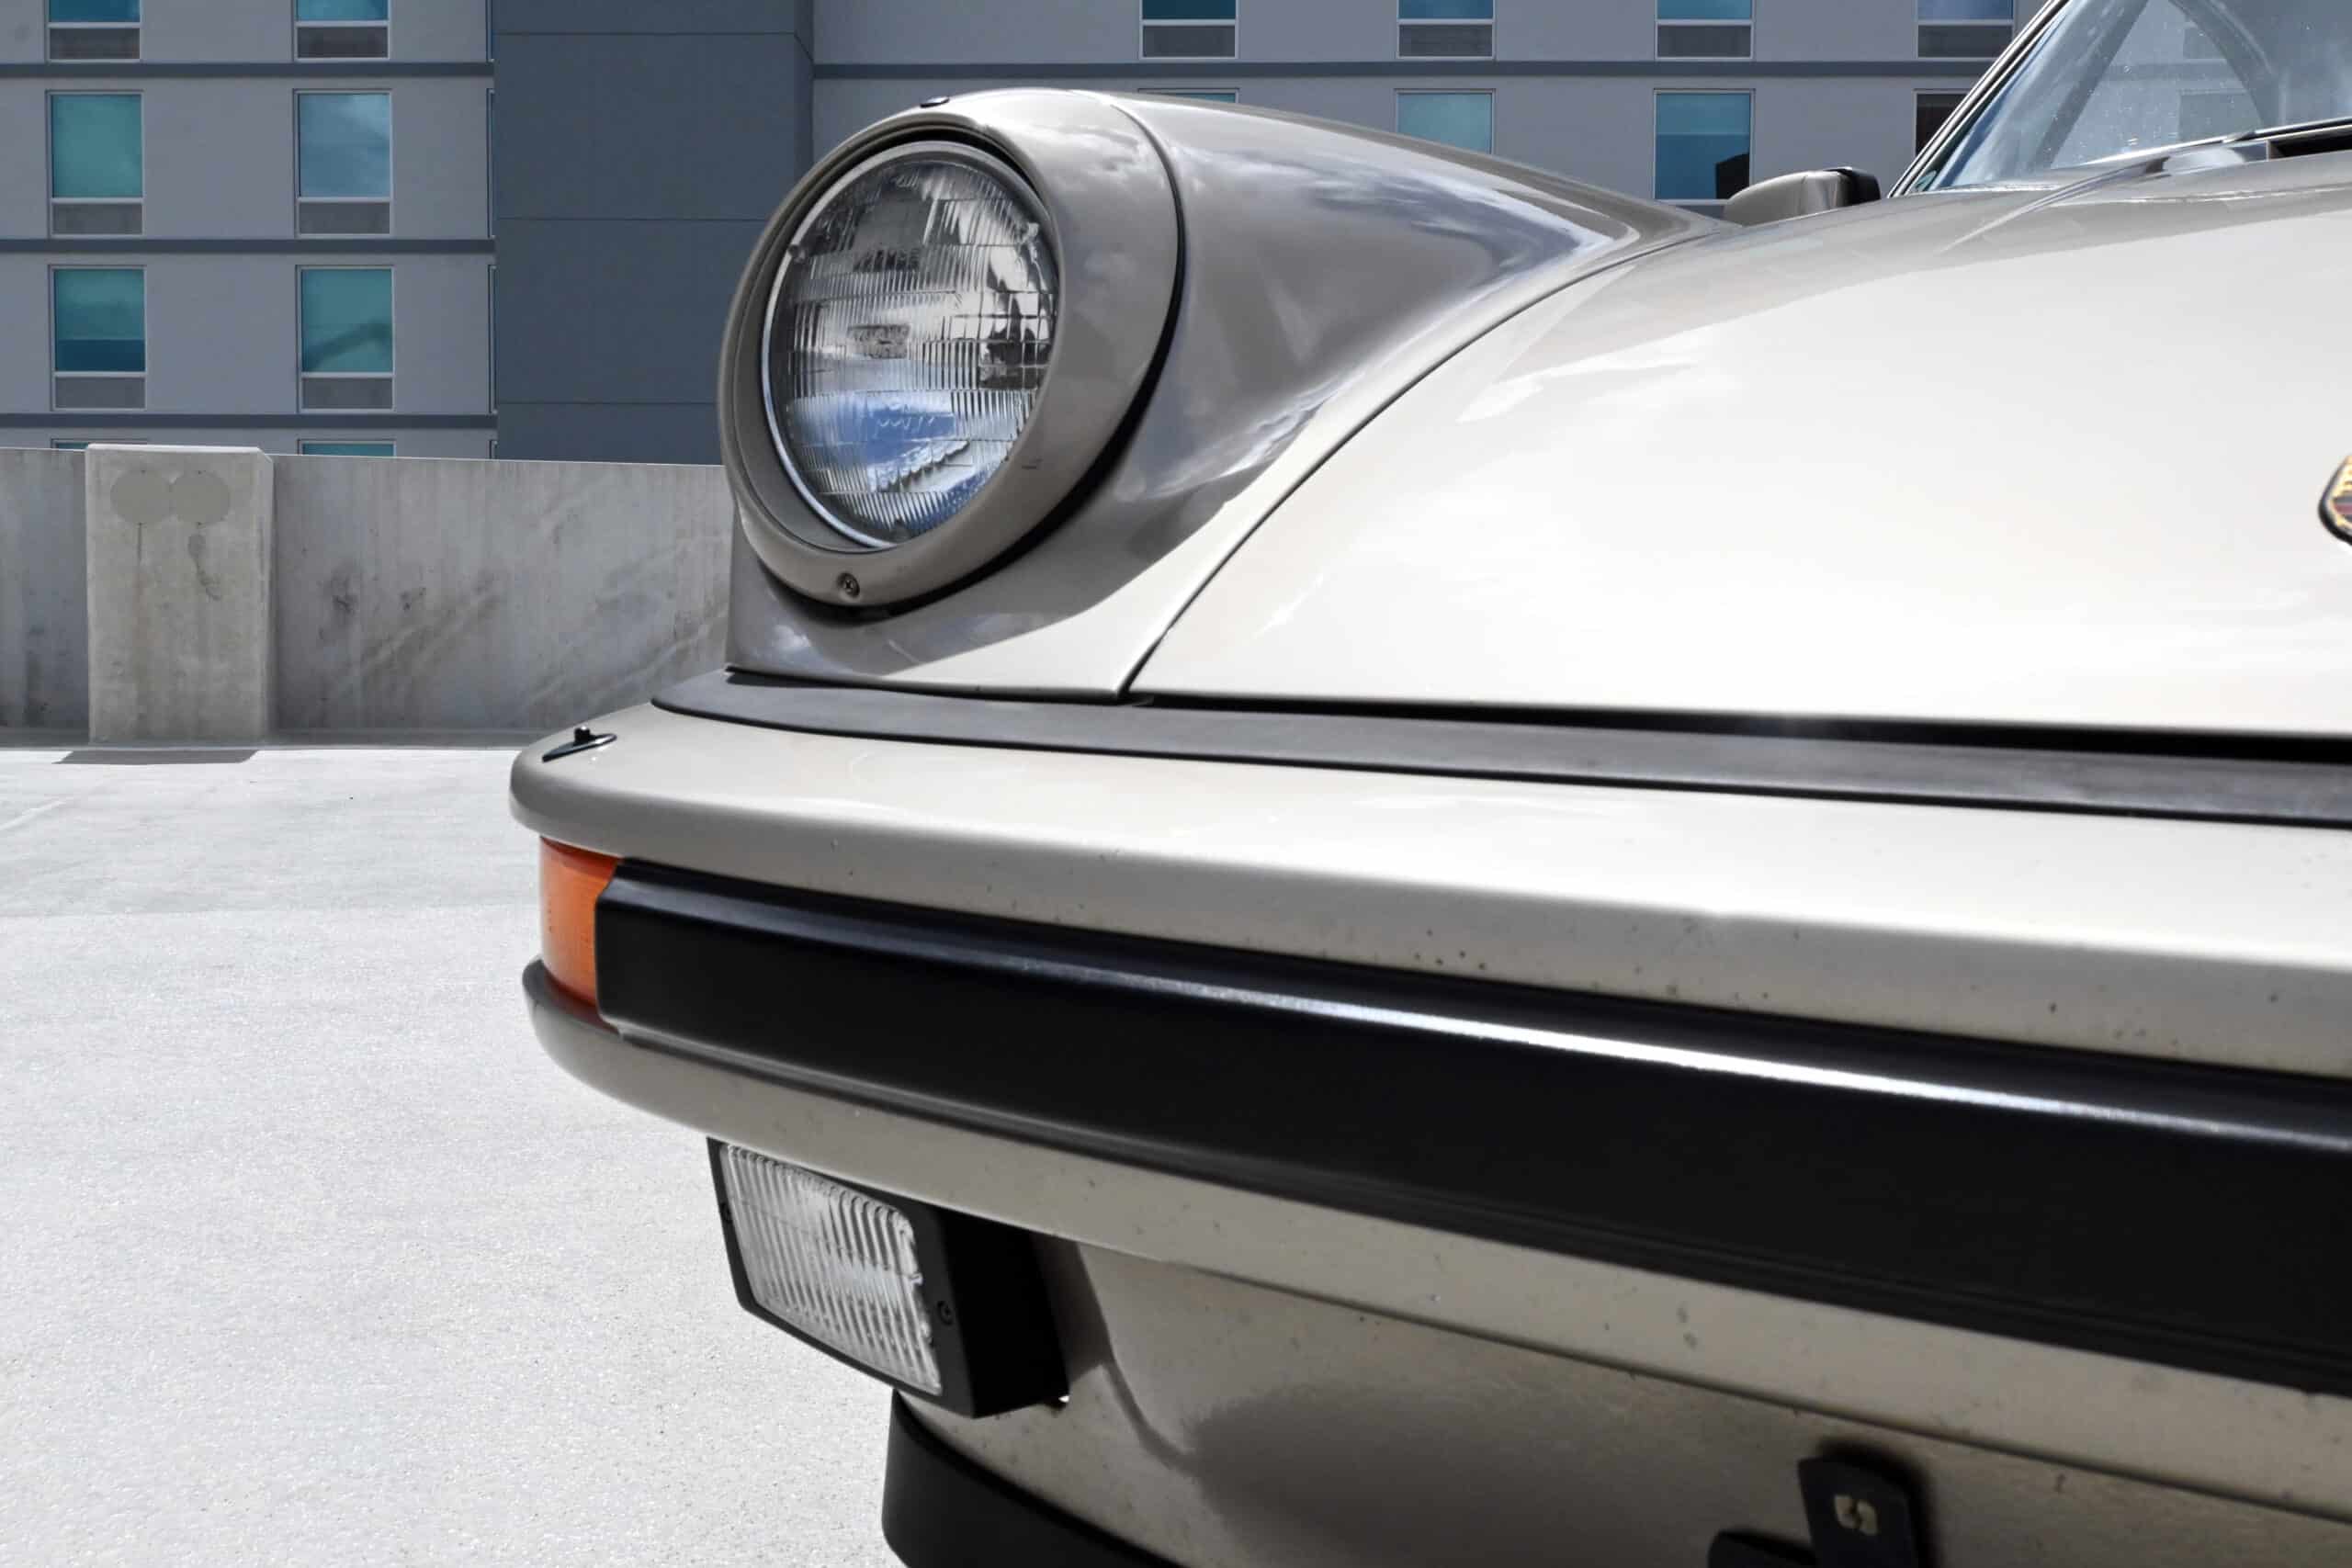 1986 911 Carrera Coupe / Rare White Gold Metallic / Freshly serviced / Accident and Rust Free